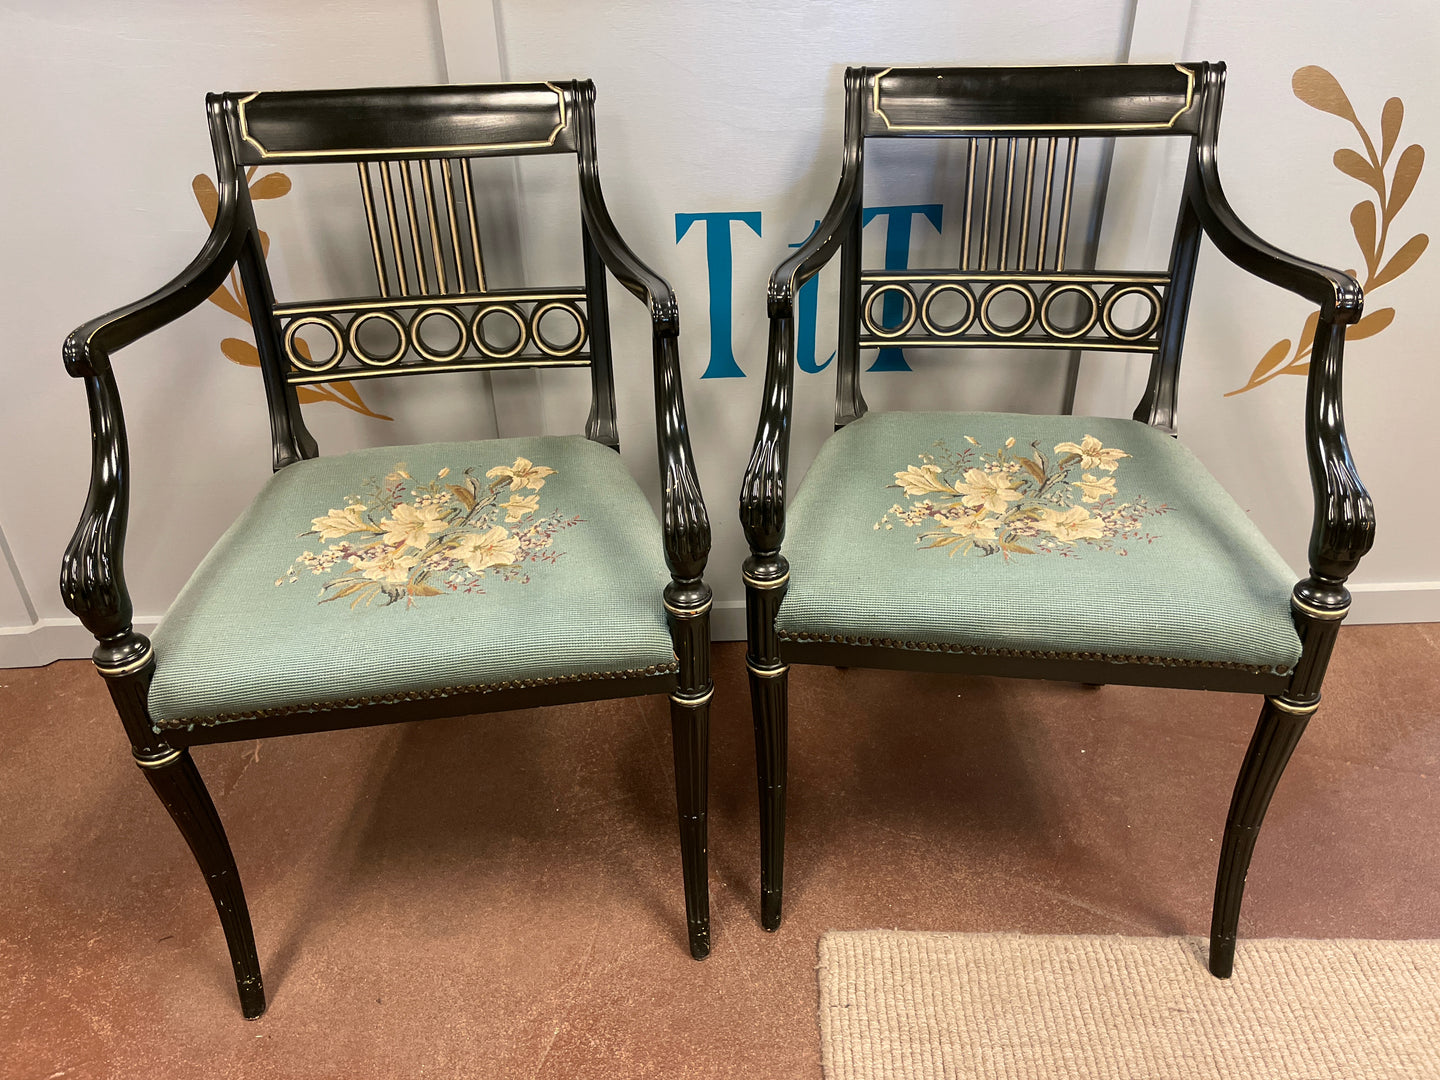 Pair of Regency Style Accent Chairs with Needlepoint Seats